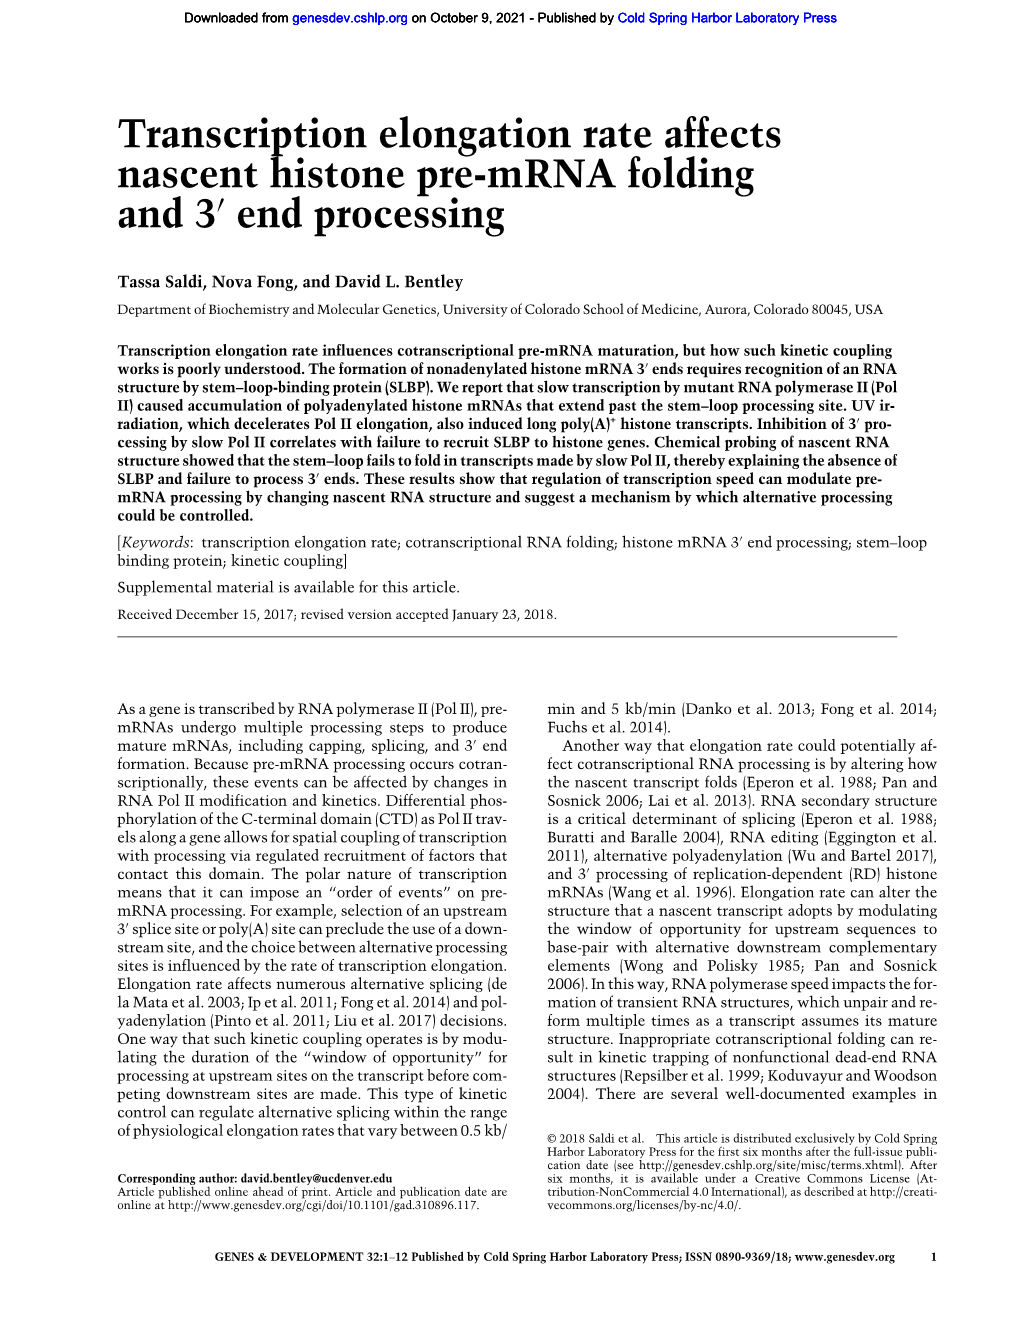 Transcription Elongation Rate Affects Nascent Histone Pre-Mrna Folding and 3′ End Processing